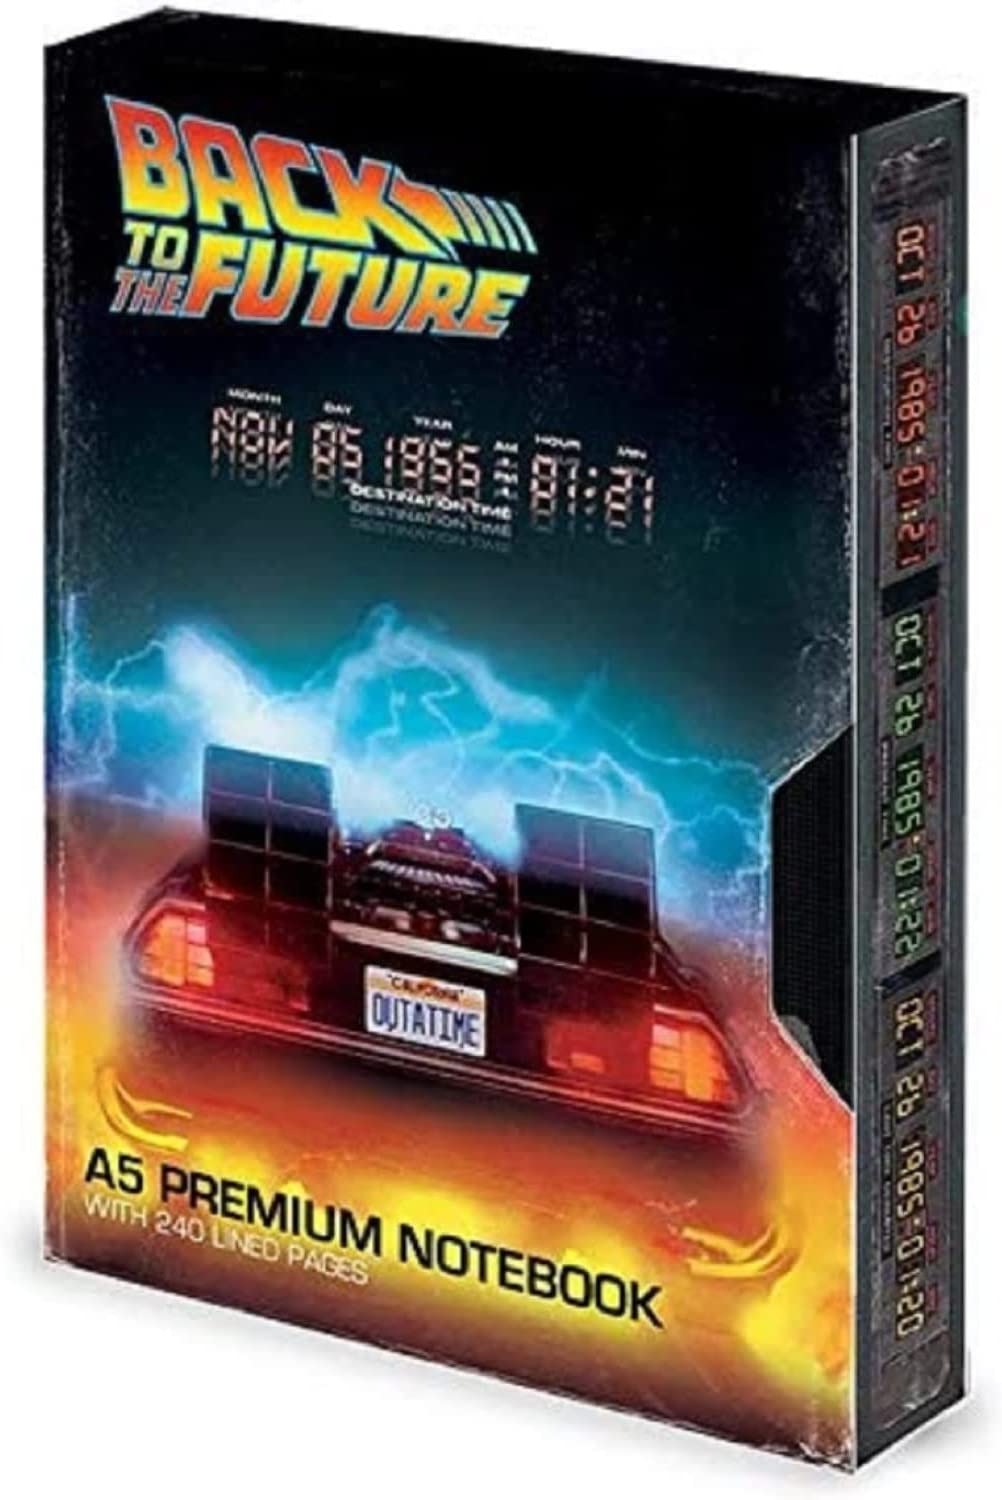 Back to The Future - Premium A5 Notebook (Great Scott) VHS